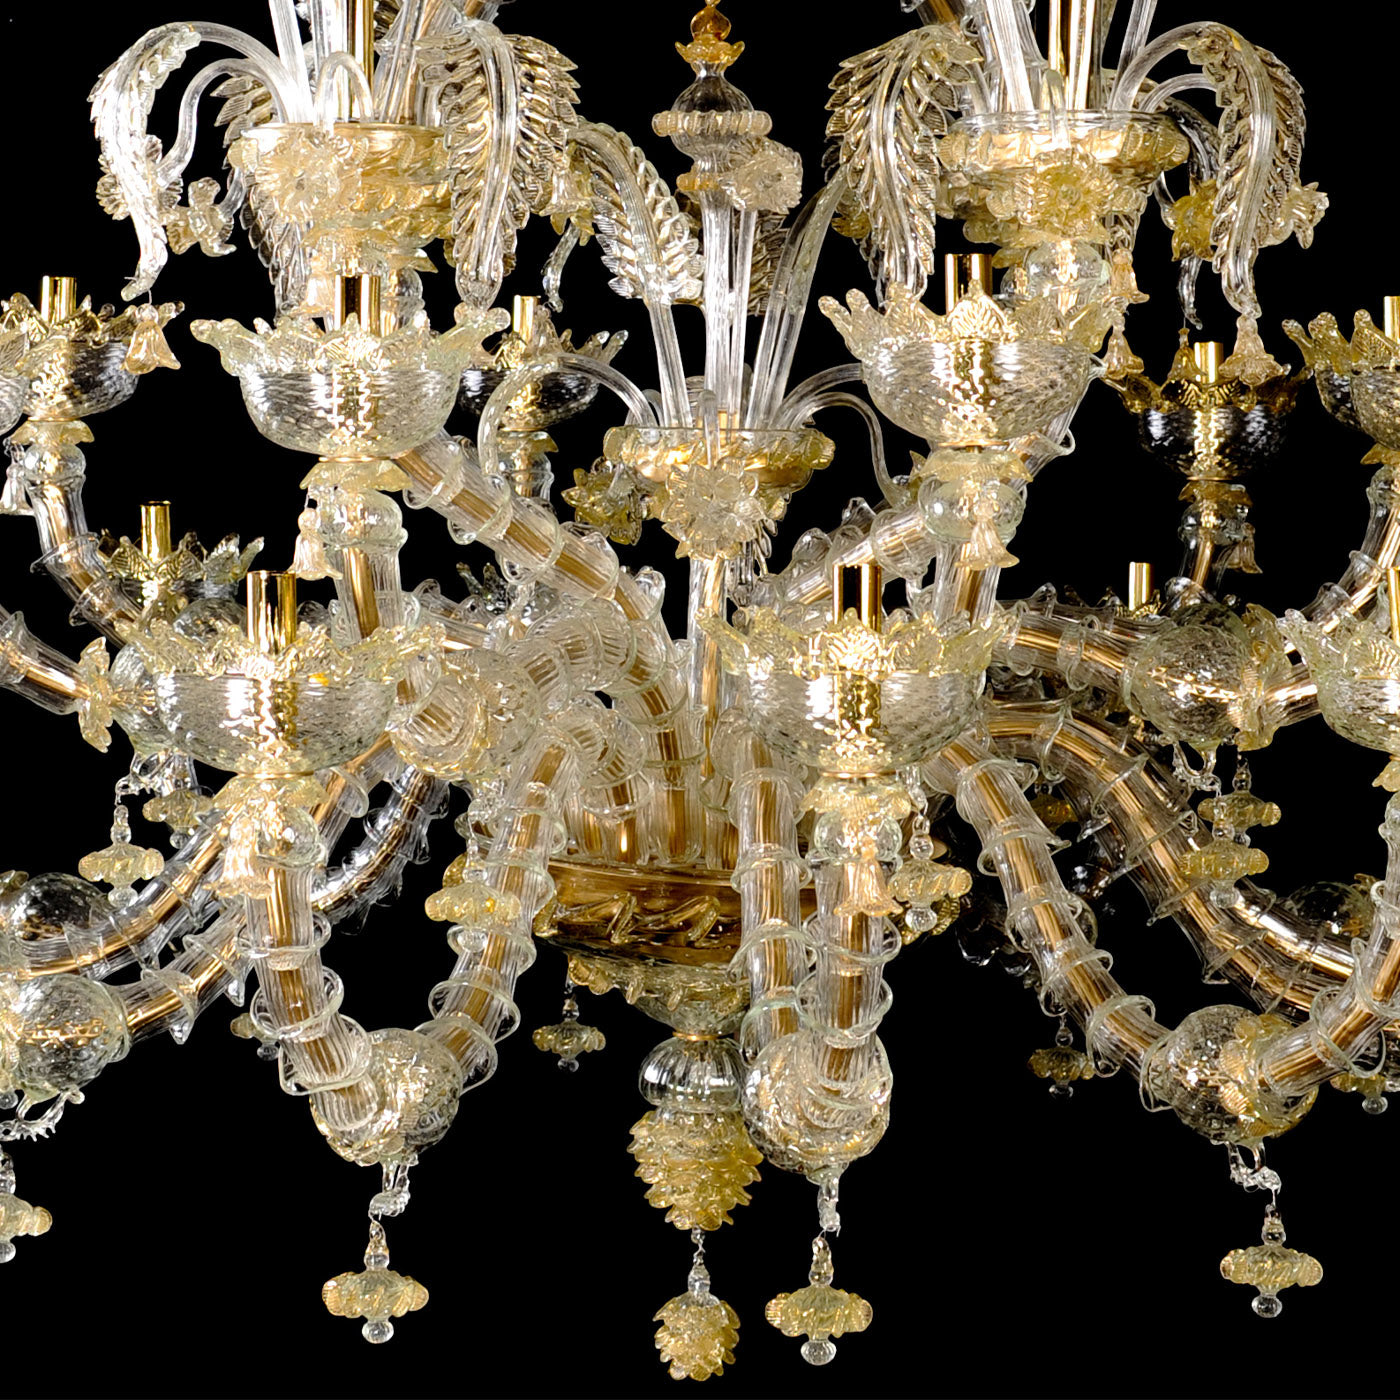 Rezzonico-style Gold and Crystal Chandelier #7 - Alternative view 1